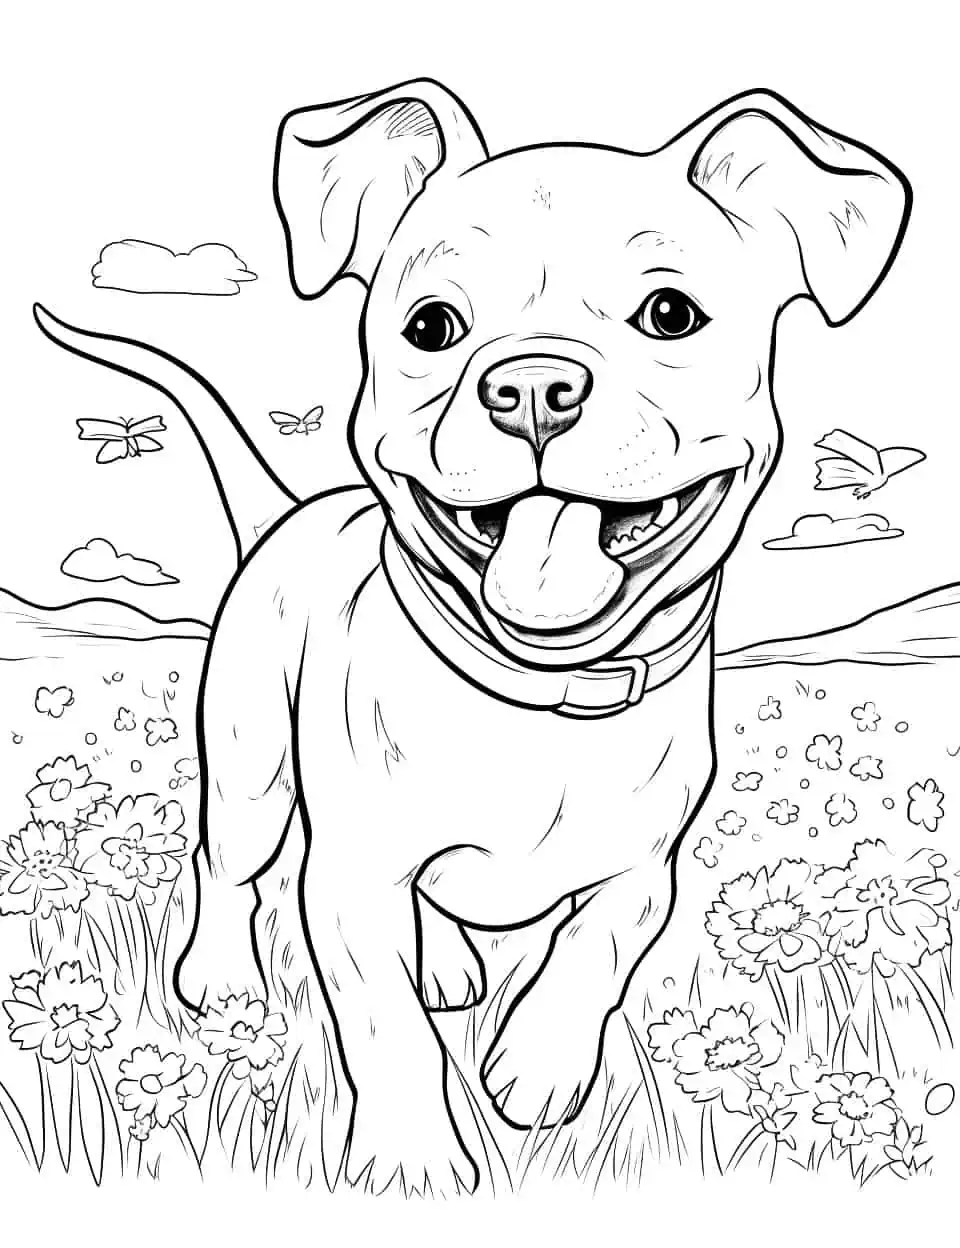 Pitbull in a Meadow Dog Coloring Page - A cheerful Pitbull running freely in a meadow full of flowers.